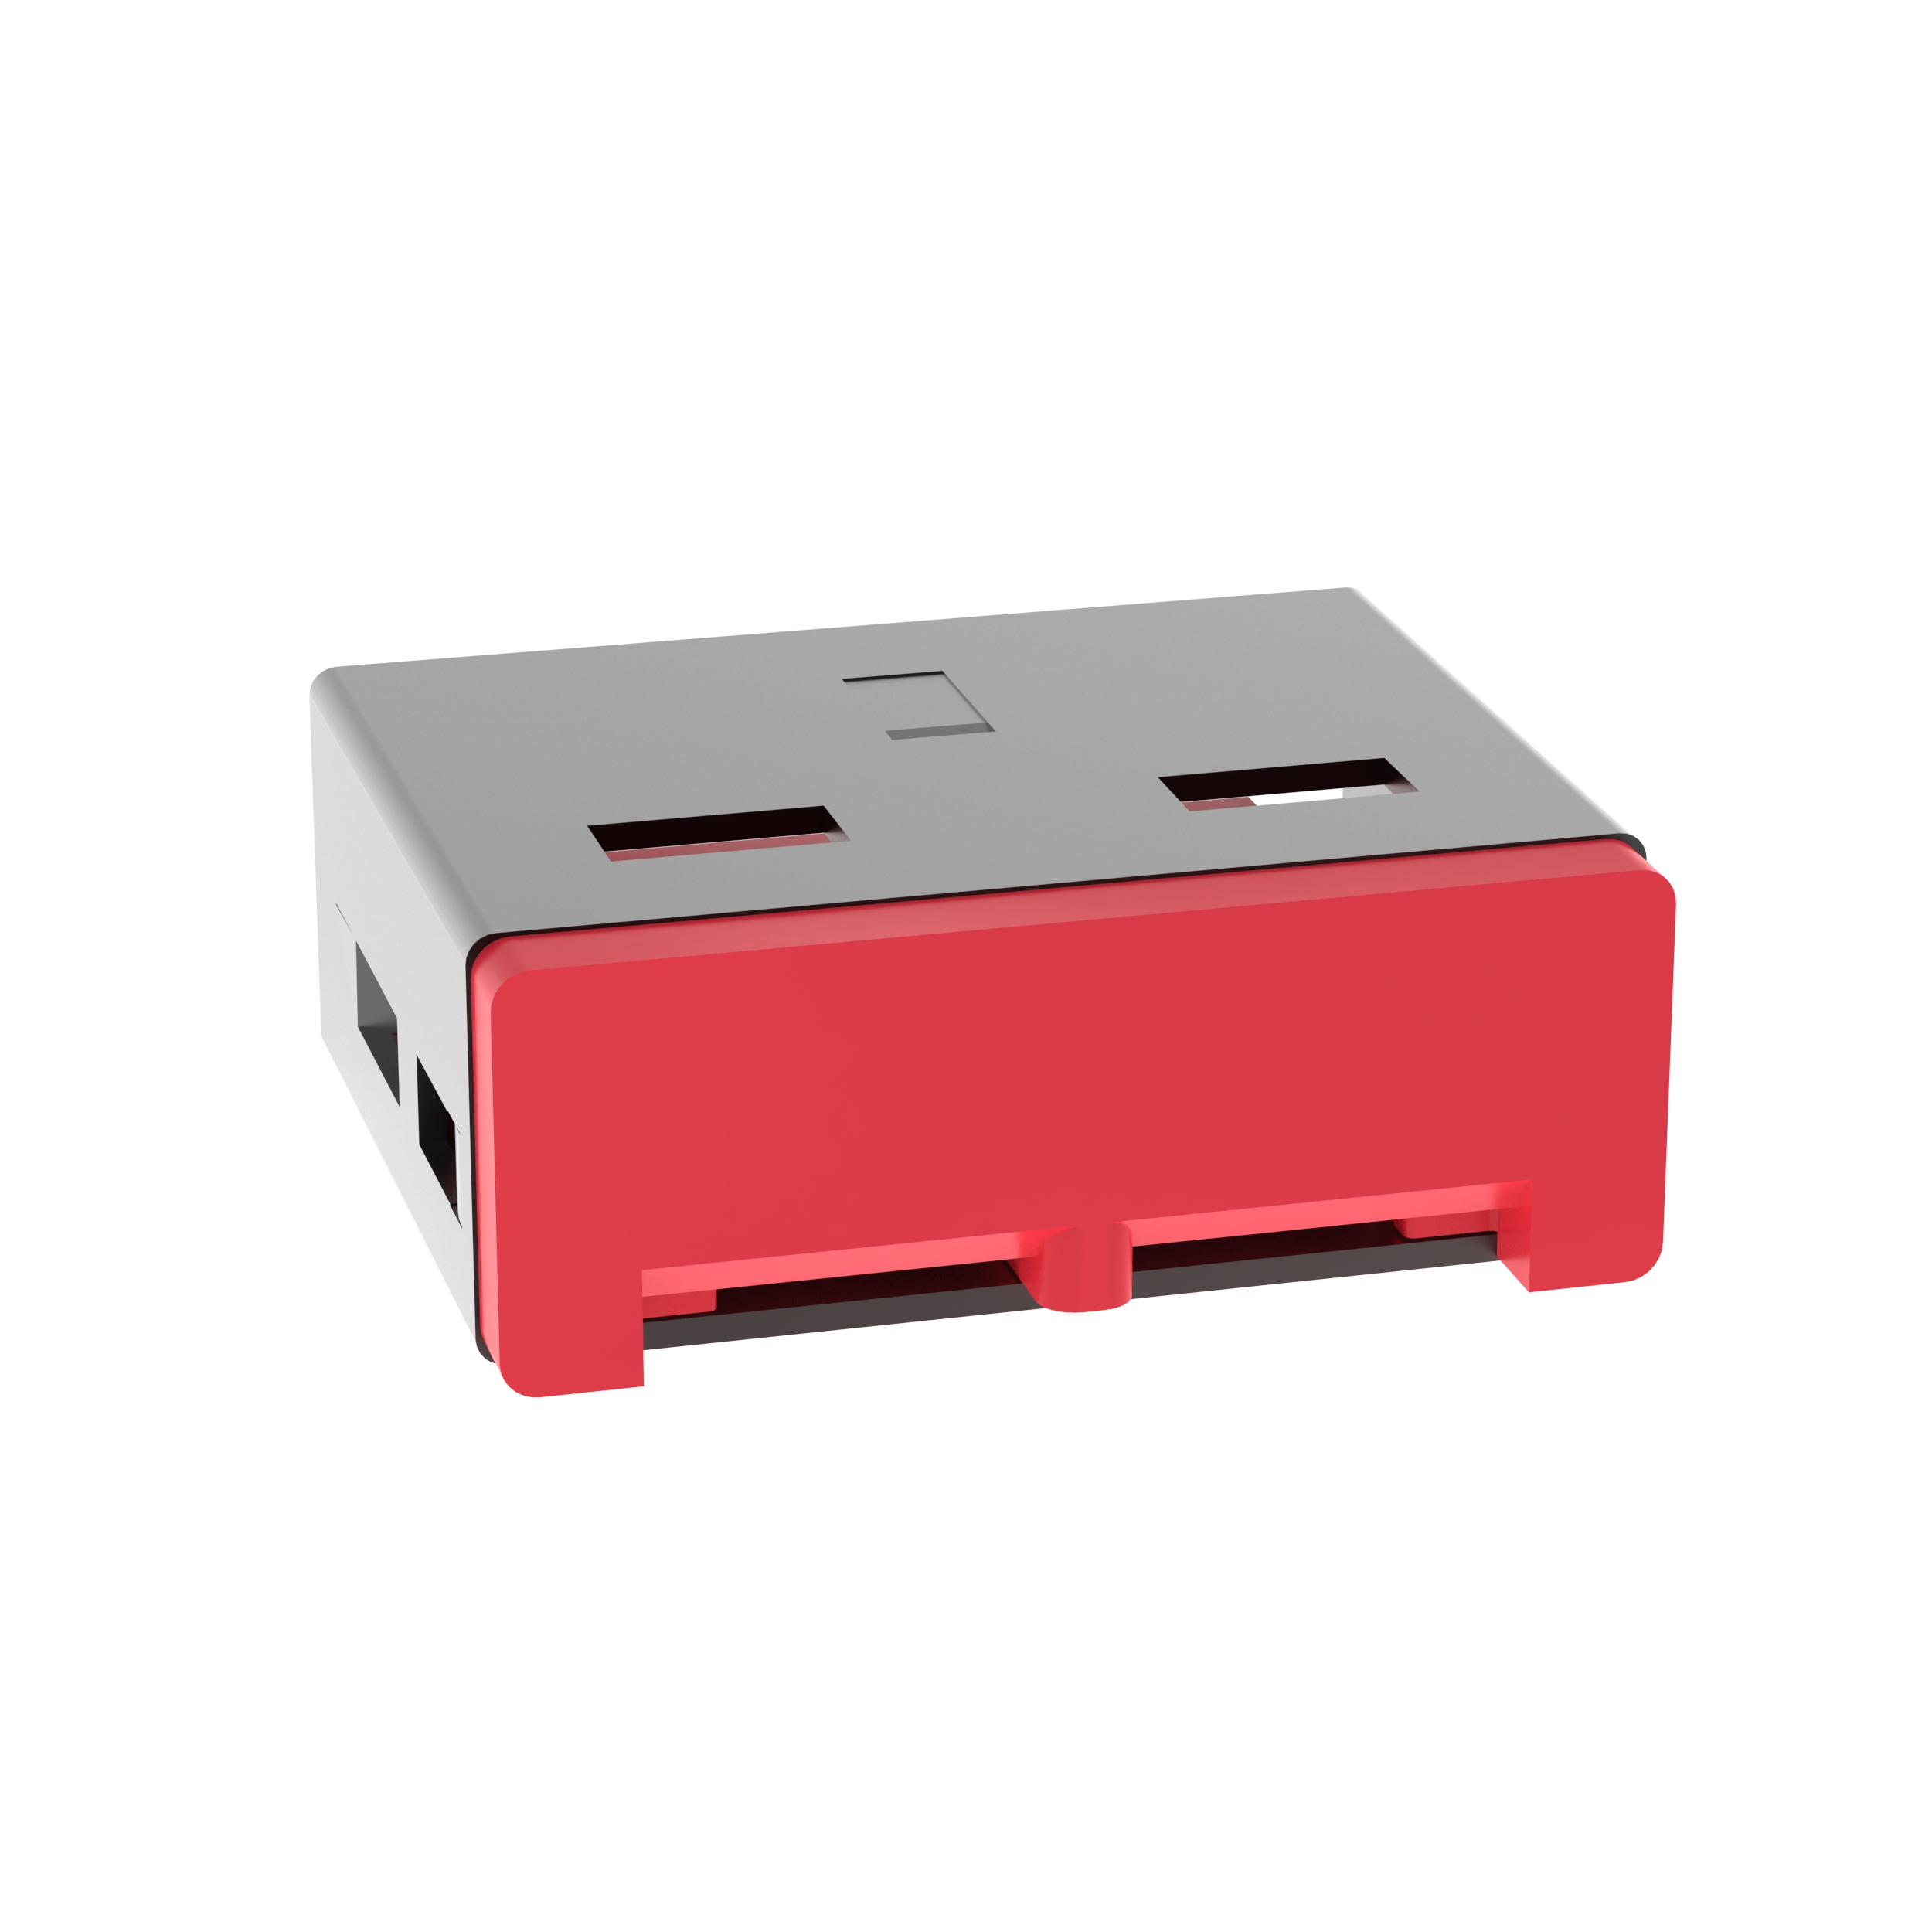 Smartkeeper USB Type A Blockout Device, Red